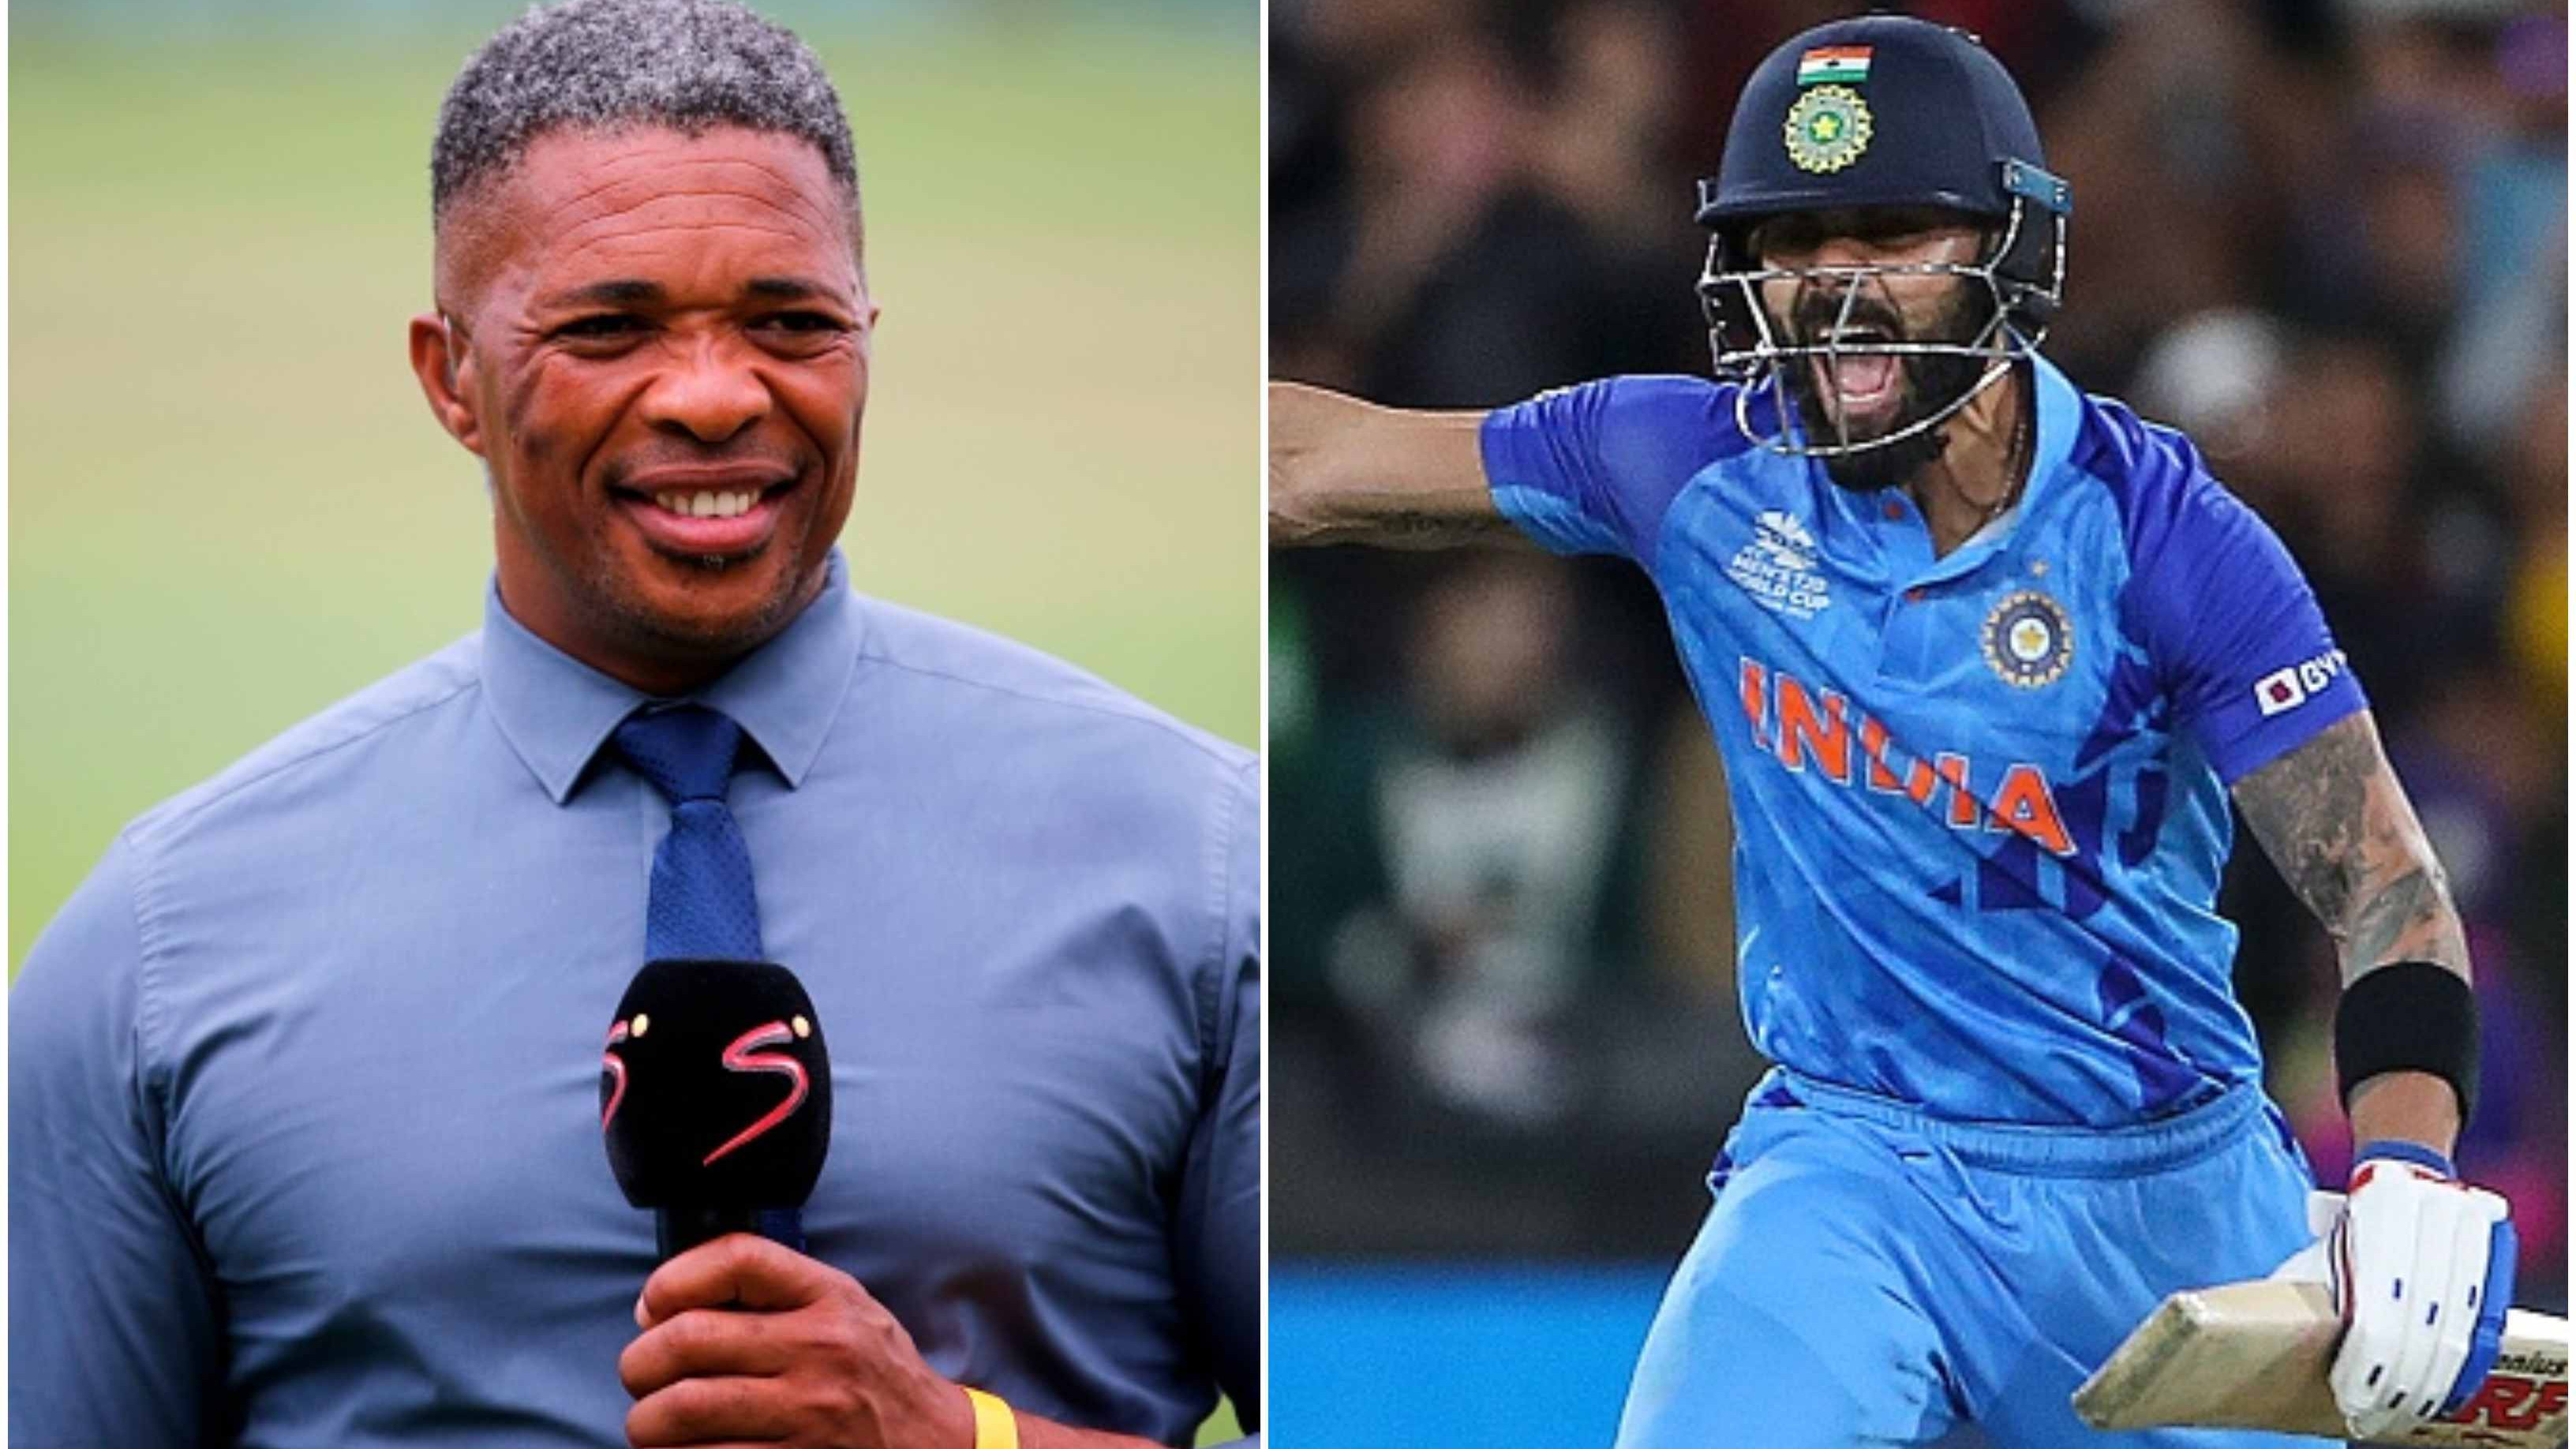 “Don't say a word to him when he is batting,” Makhaya Ntini warns bowlers against sledging Virat Kohli